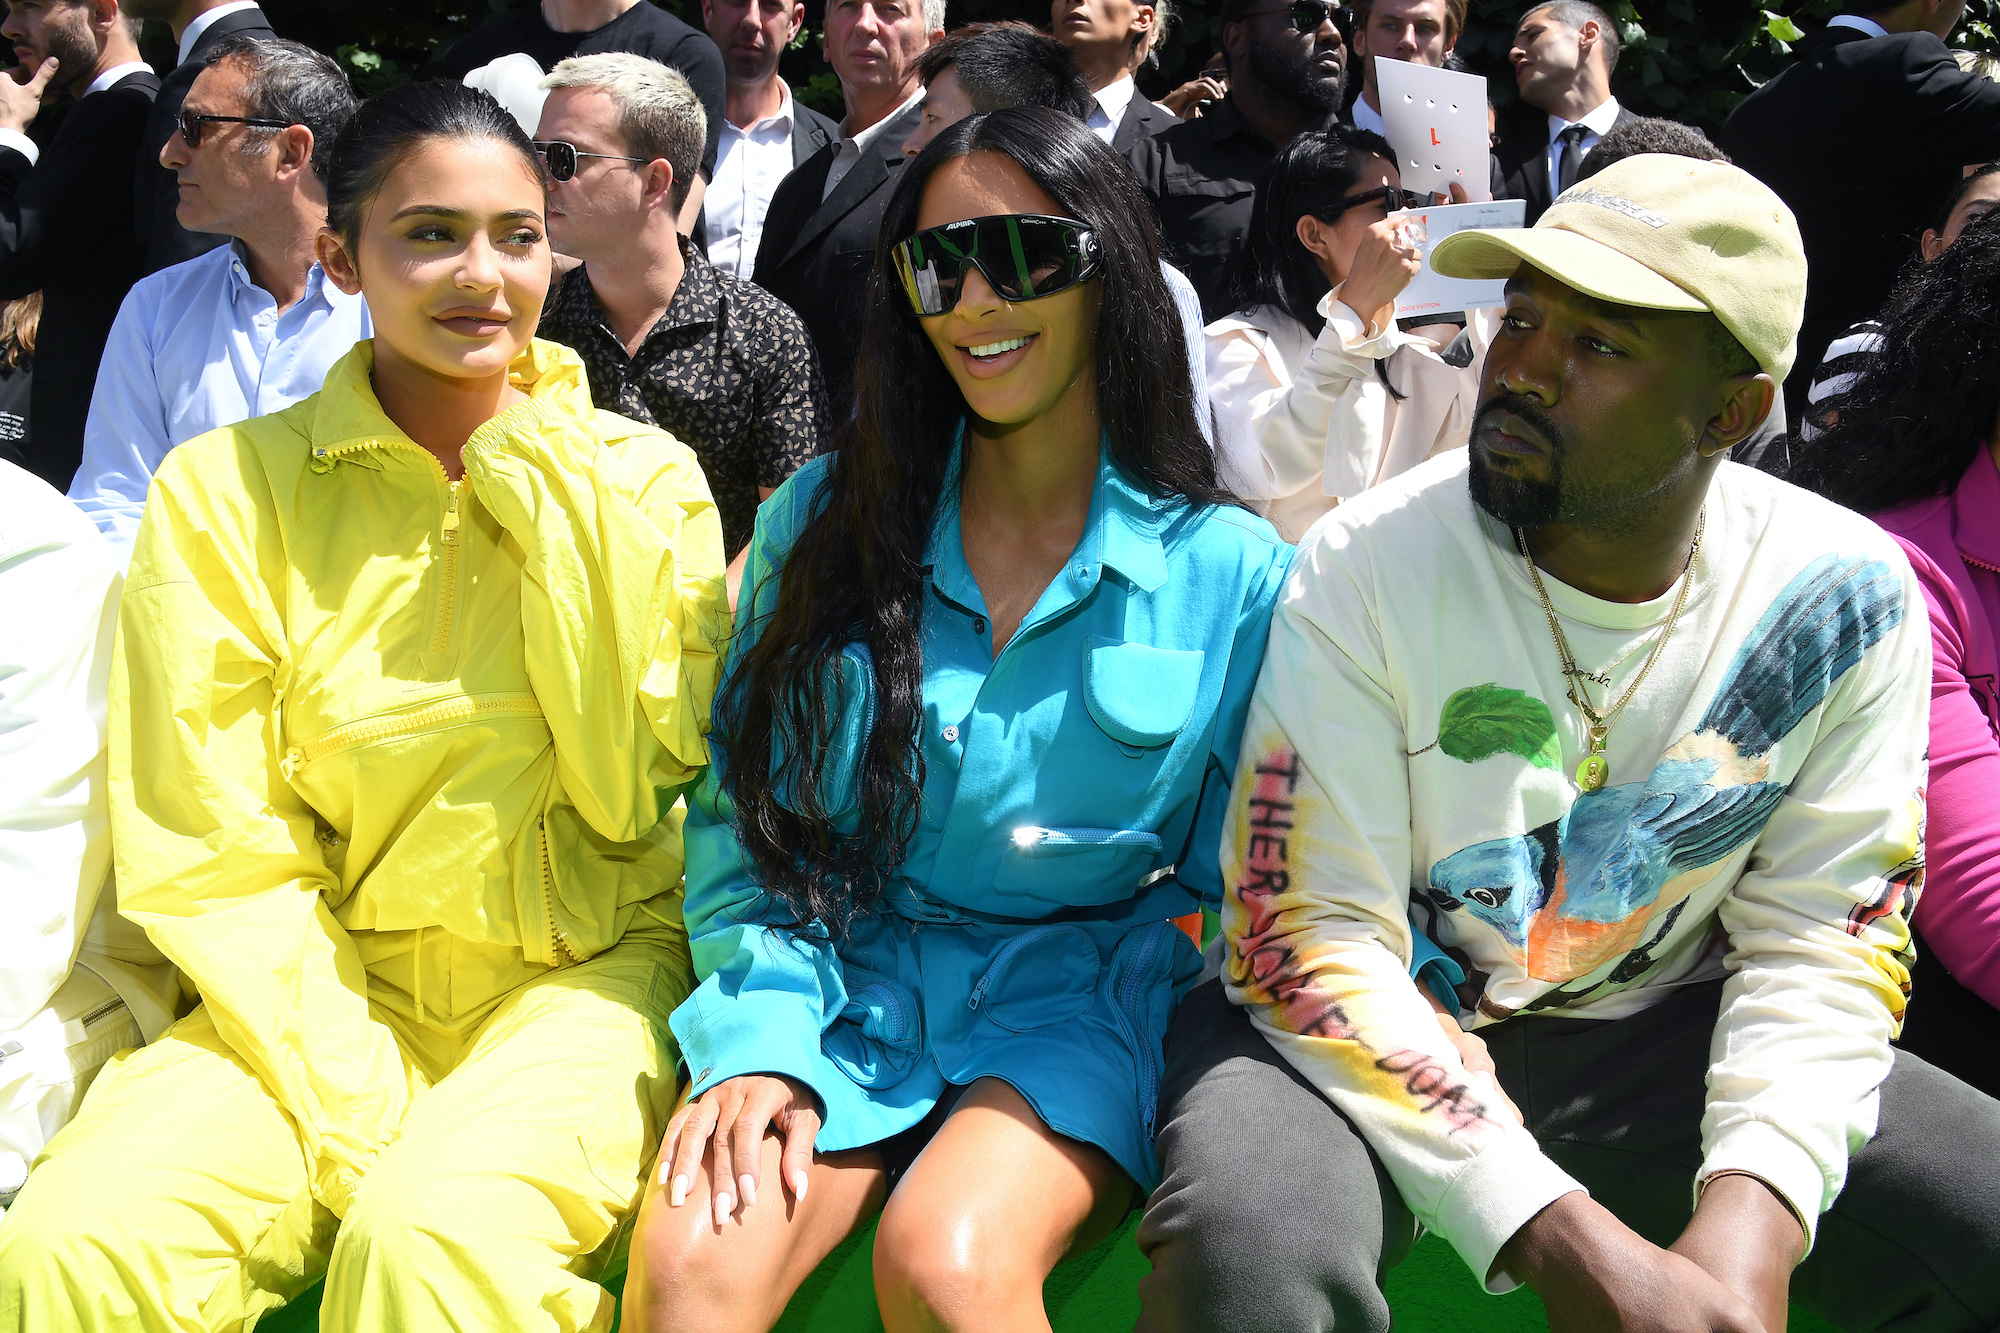 Was Kylie Jenner's Instagram Shoe Cover-Up a Nod to Kimye's Split or No ...